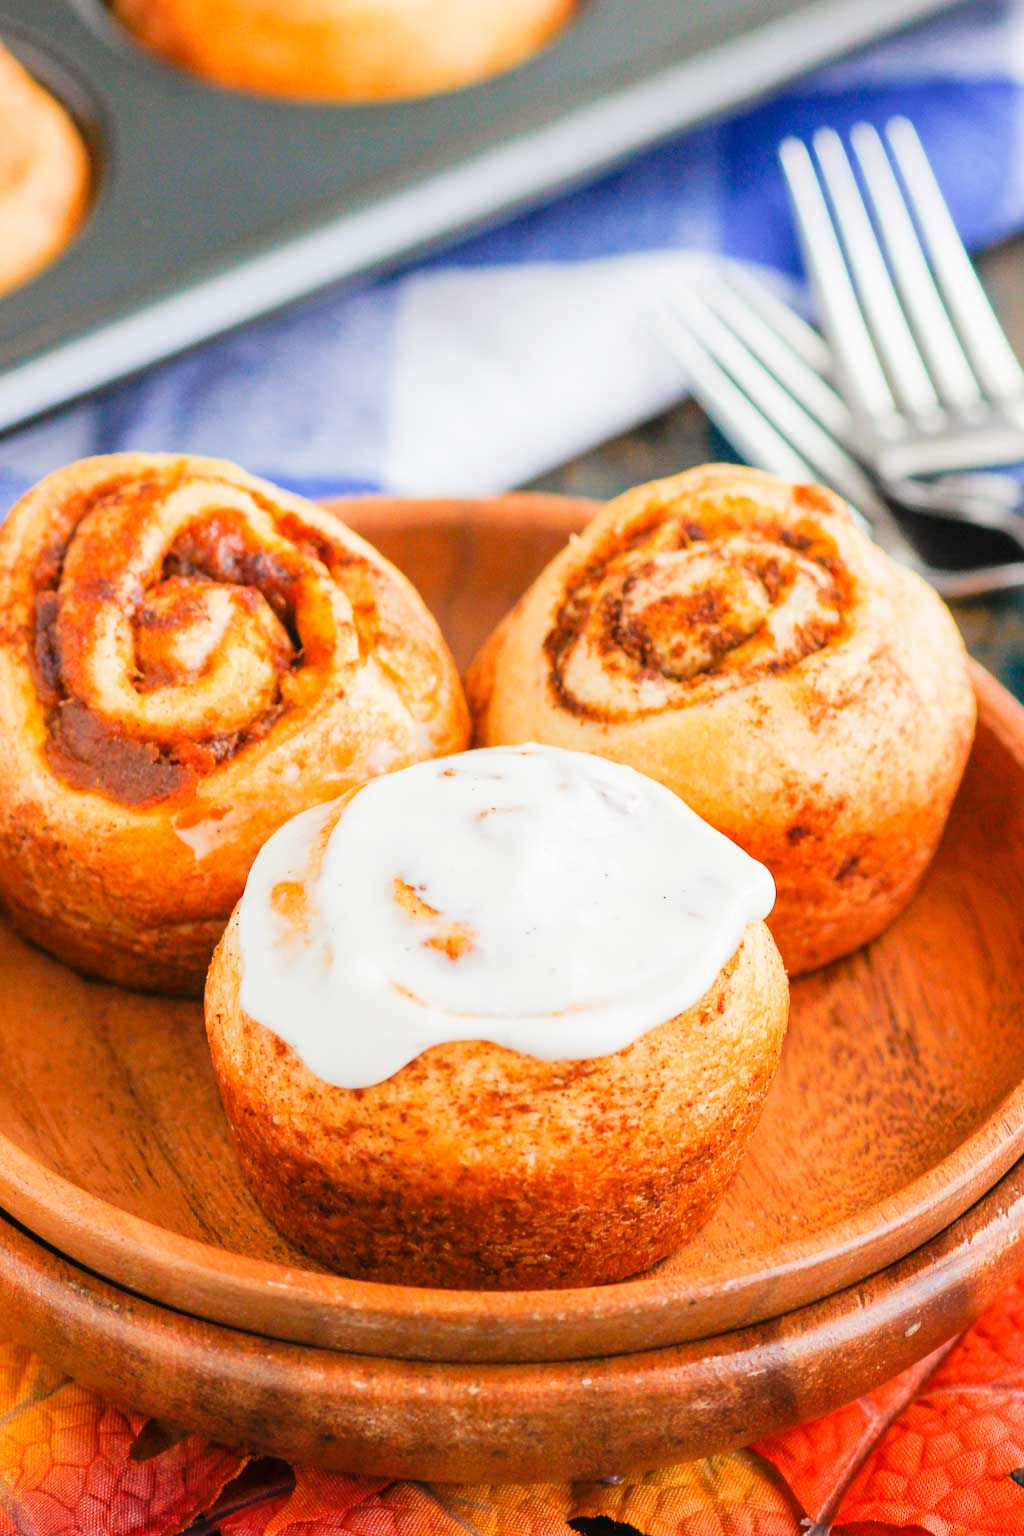 These Easy Pumpkin Cinnamon Rolls are a fun twist on the classic kind and ready in just 30 minutes. Filled with sweet pumpkin, cozy spices and topped with the most delicious cinnamon cream cheese frosting, these rolls are perfect for breakfast or dessert! #cinnamonrolls #cinnamonrollrecipe #pumpkin #pumpkincinnamonrolls #pumpkinbreakfast #pumpkindessert #dessertrecipes #breakfastrecipes #fallrecipes #breakfast #dessert